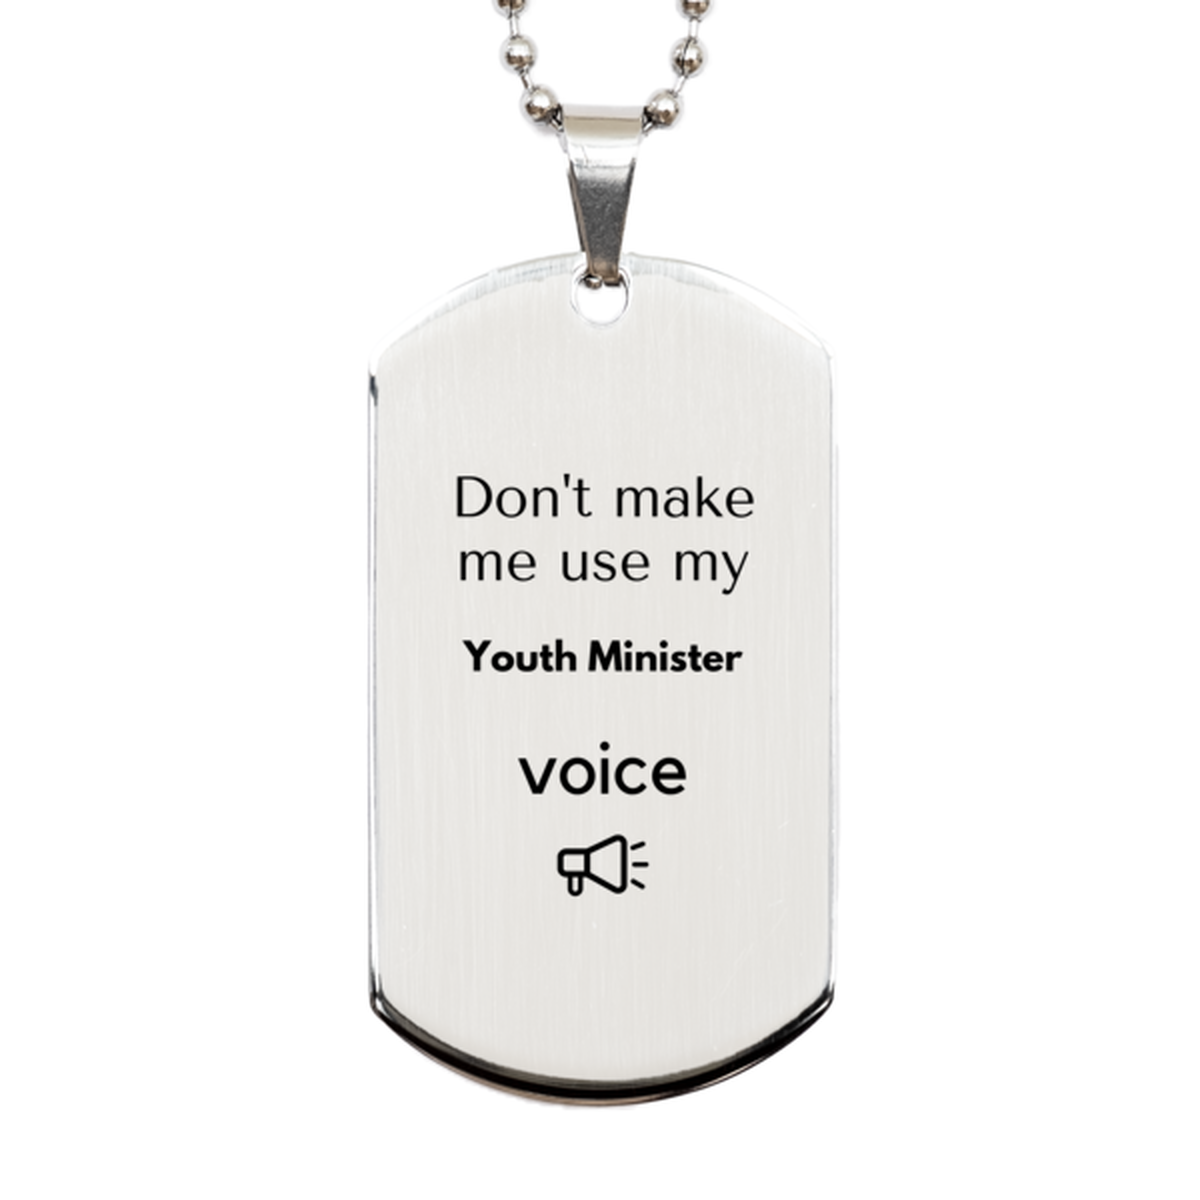 Don't make me use my Youth Minister voice, Sarcasm Youth Minister Gifts, Christmas Youth Minister Silver Dog Tag Birthday Unique Gifts For Youth Minister Coworkers, Men, Women, Colleague, Friends